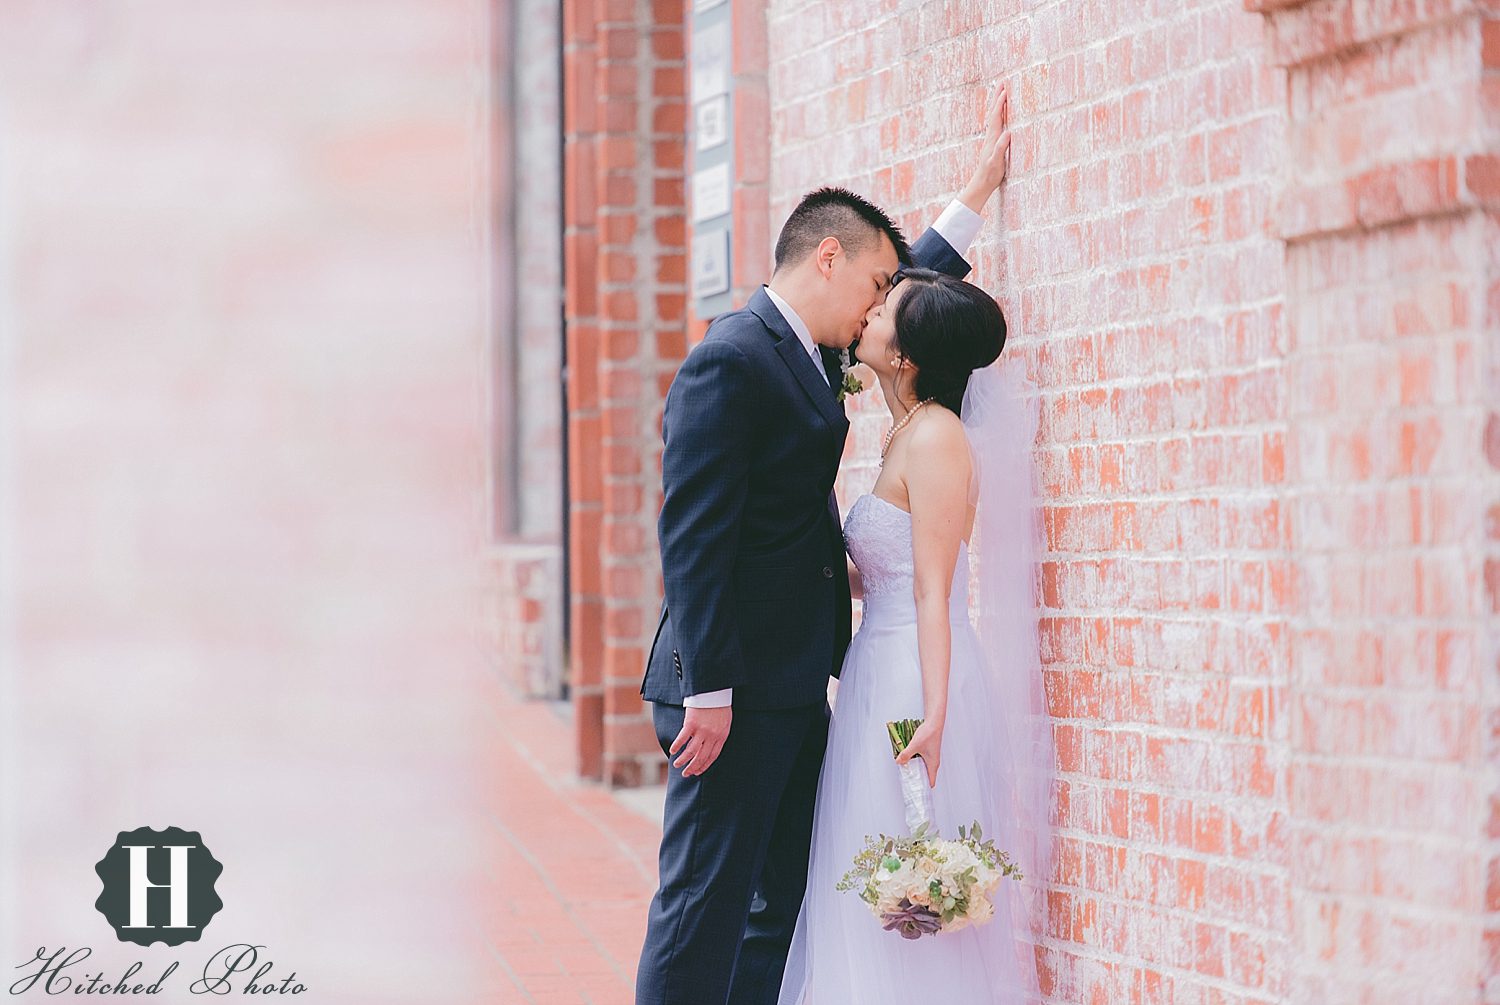 Airy,Bridal,Bright,Engagement,Light,Los Angeles Wedding Photographer,Malaga Cove Library Wedding,Malaga Cove Plaza Wedding Photos,Palos Verdes Wedding,Photography,Portraits,Romantic,Timeless,Vintage,Wedding,